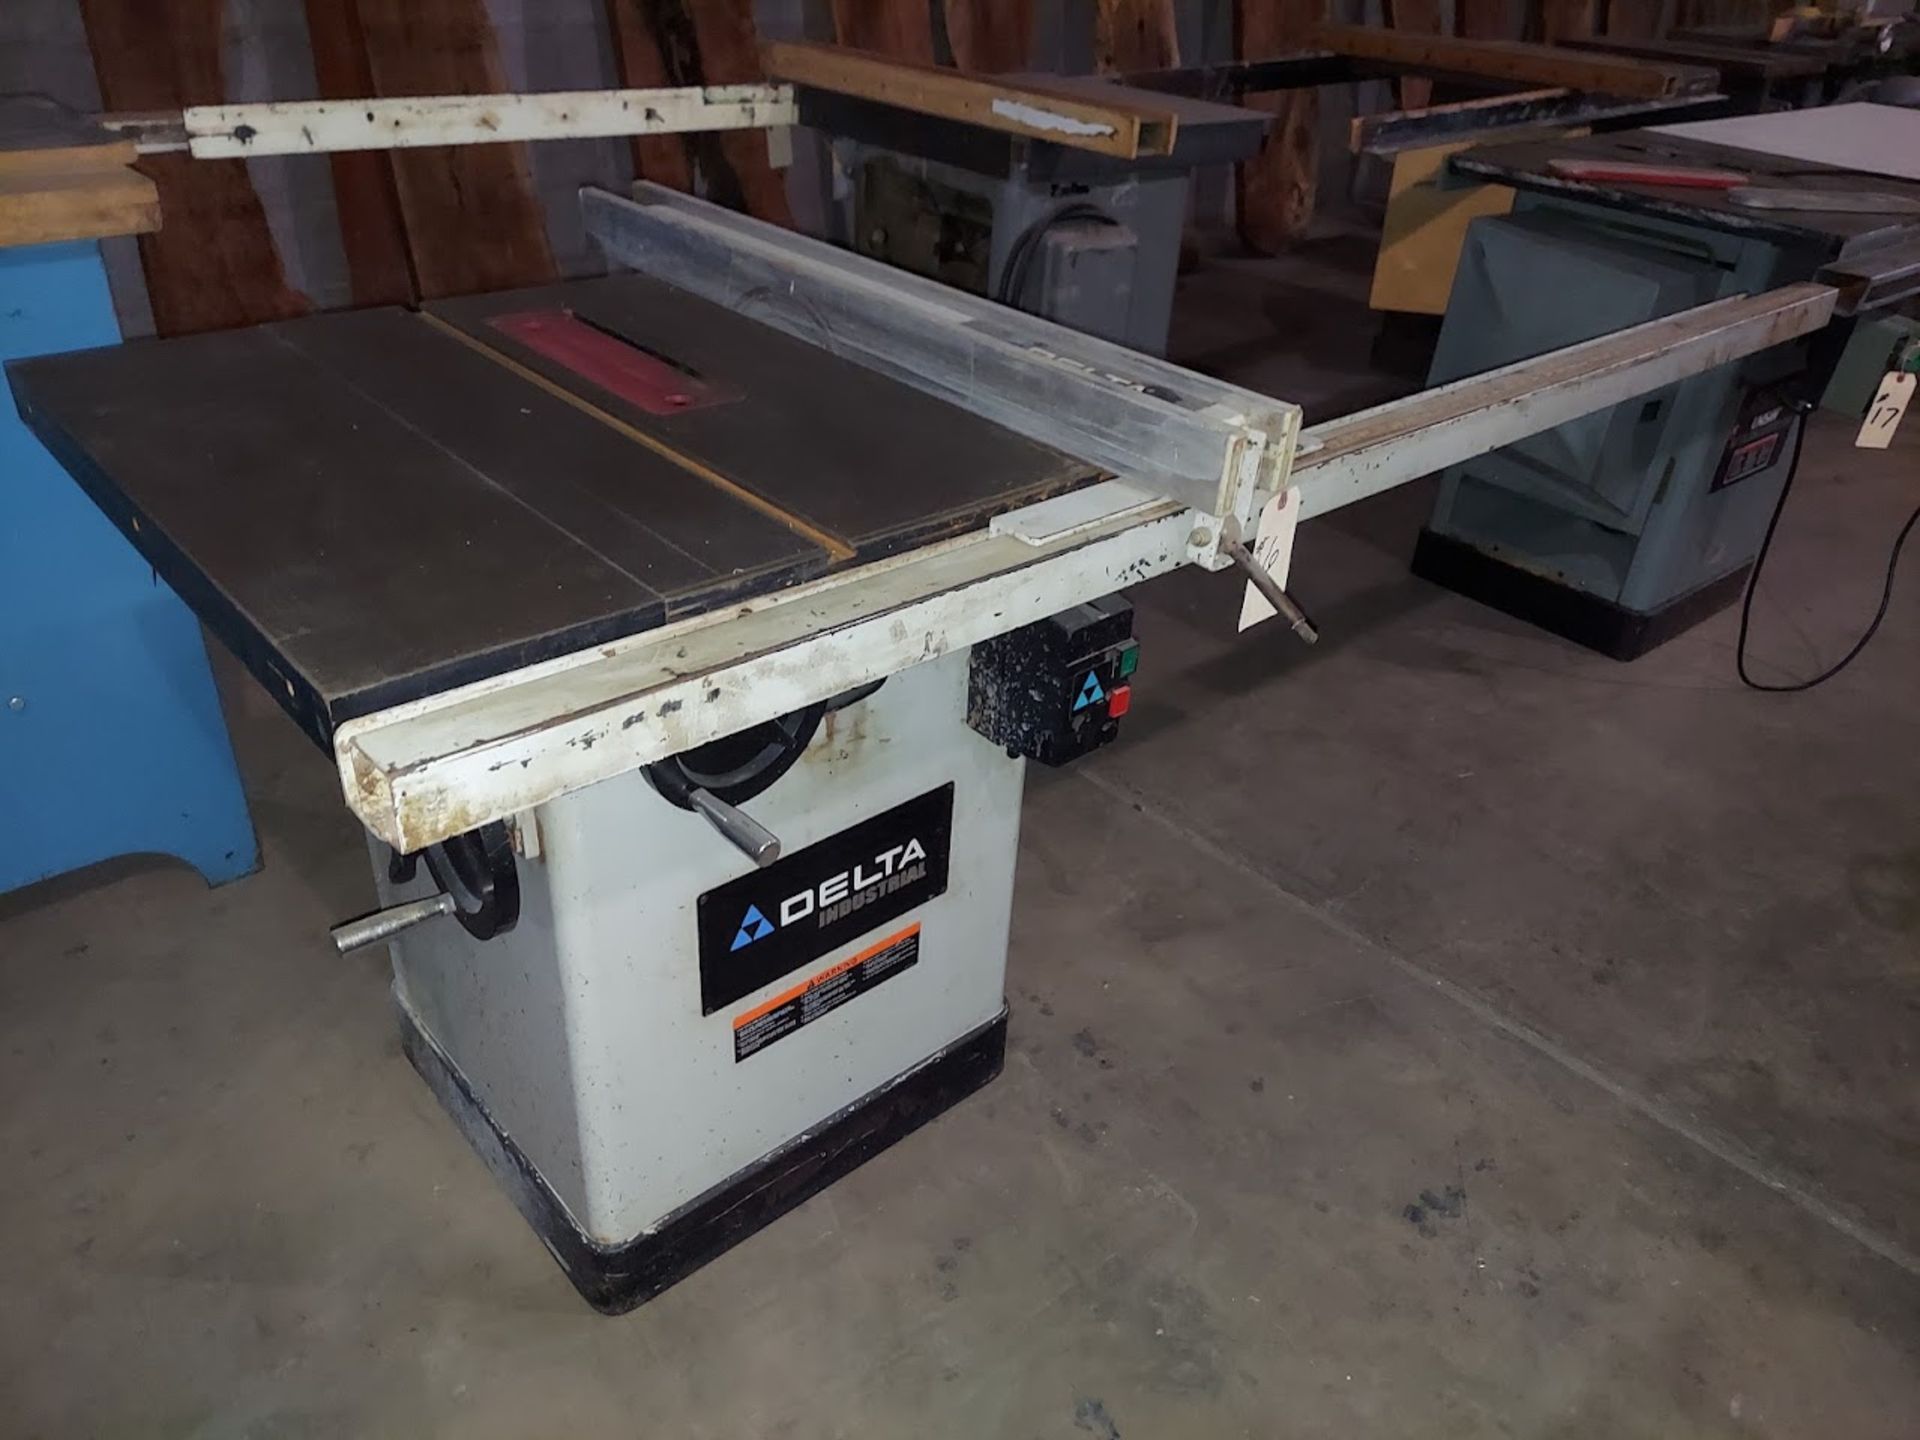 Delta Industrial 10" Cabinet Table Saw, Model #36-729, T-Square Fence & 51" Rail, Motor is 15 Amp